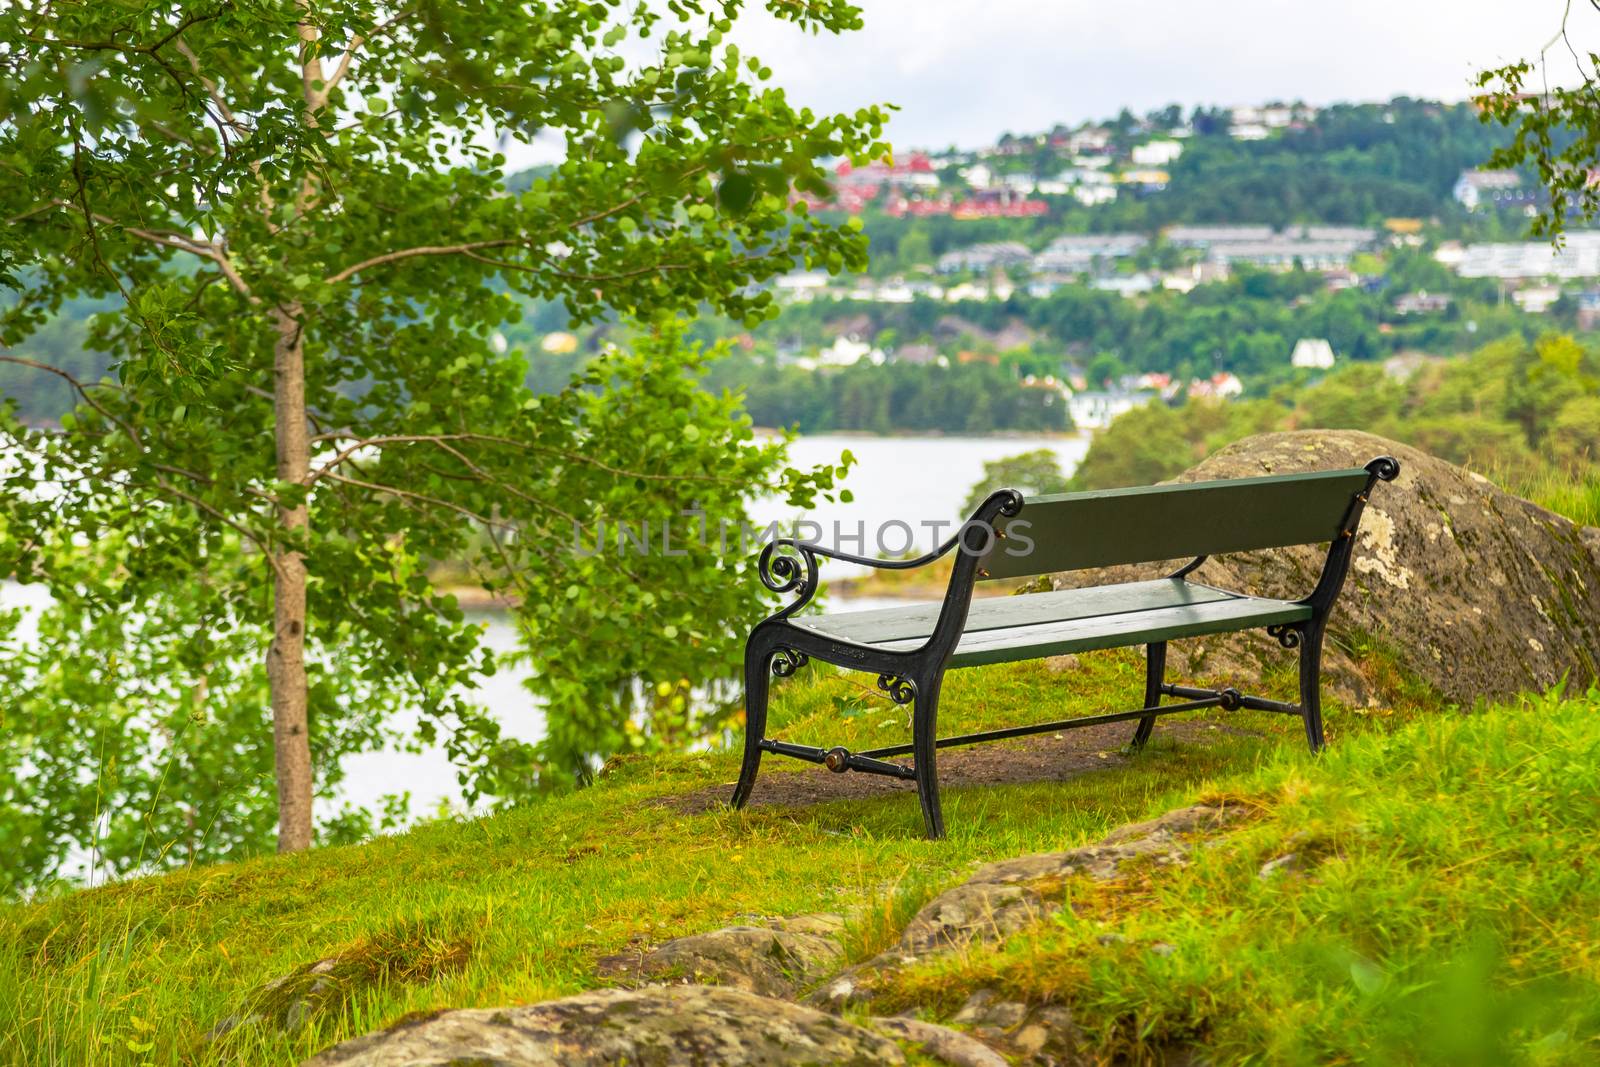 Bench without people in a picturesque place in nature. Bench overlooking the pond near the house of Edvard Grieg.